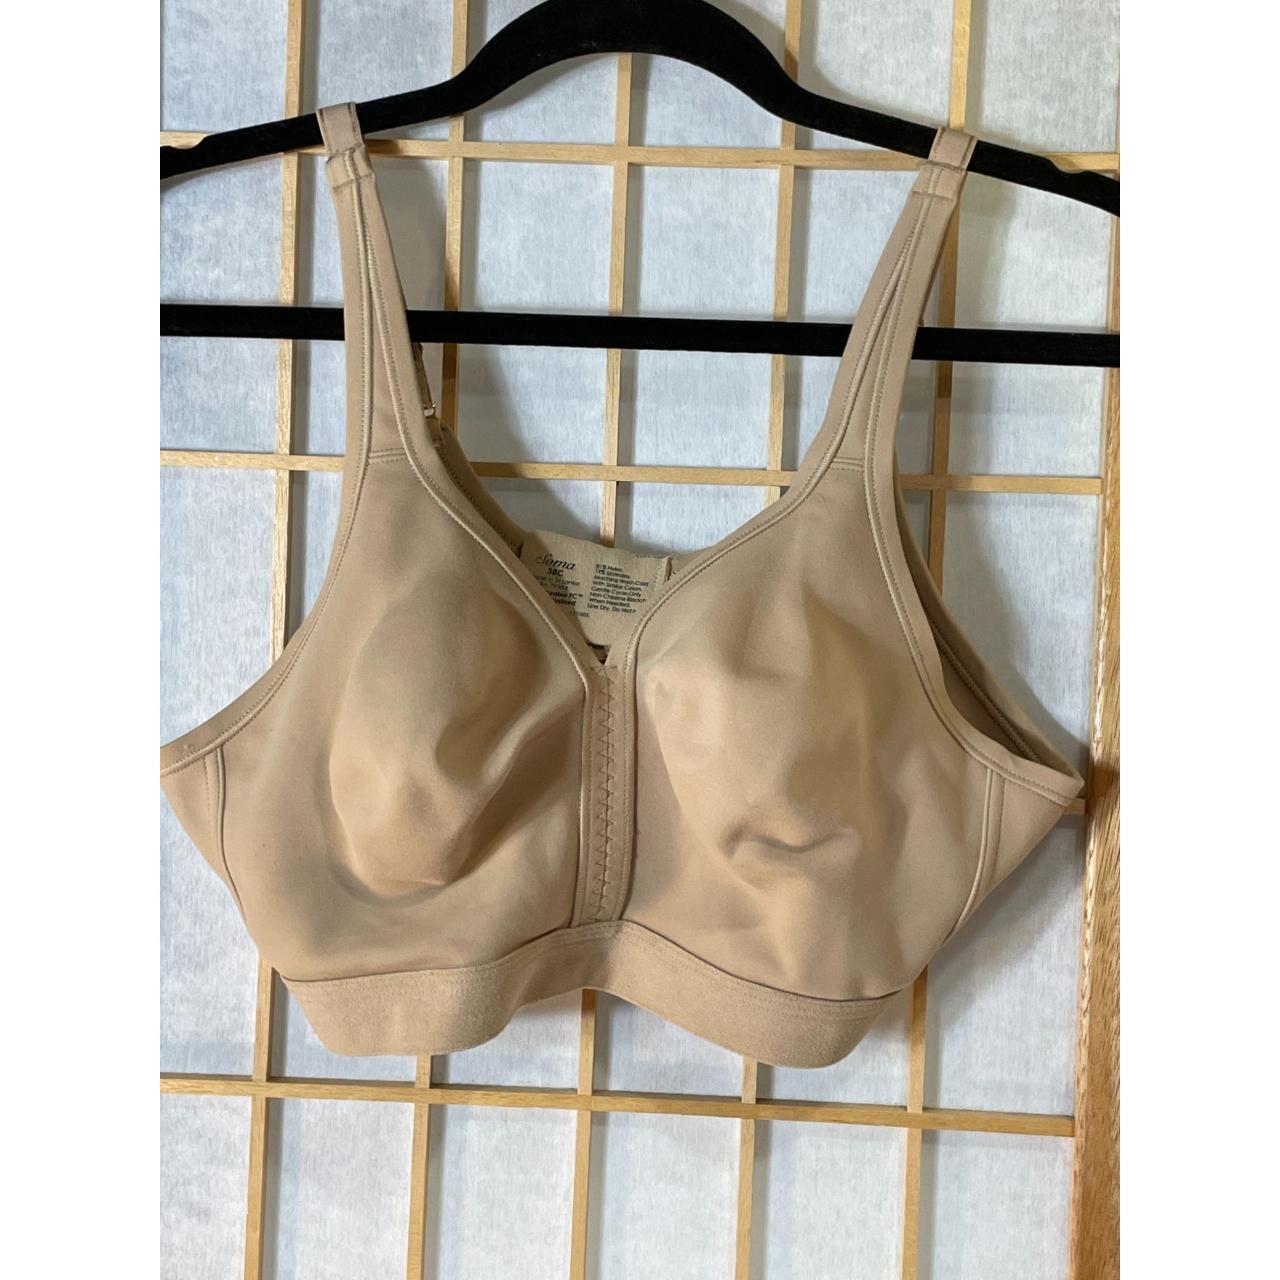 Classic nude bra from Soma. Size 38C. Embraceable FC - Depop